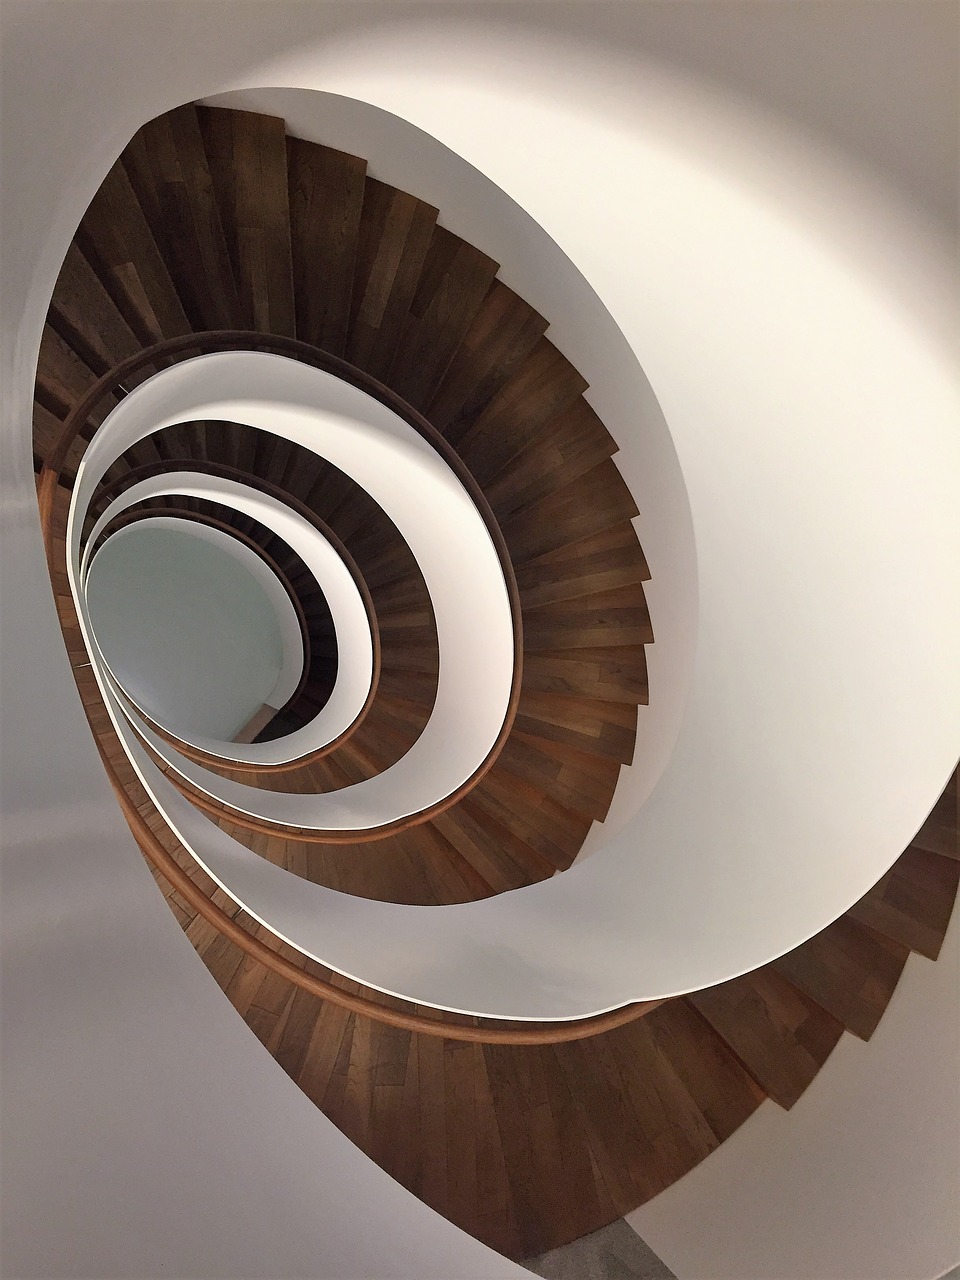 stairs spiral wood free photo